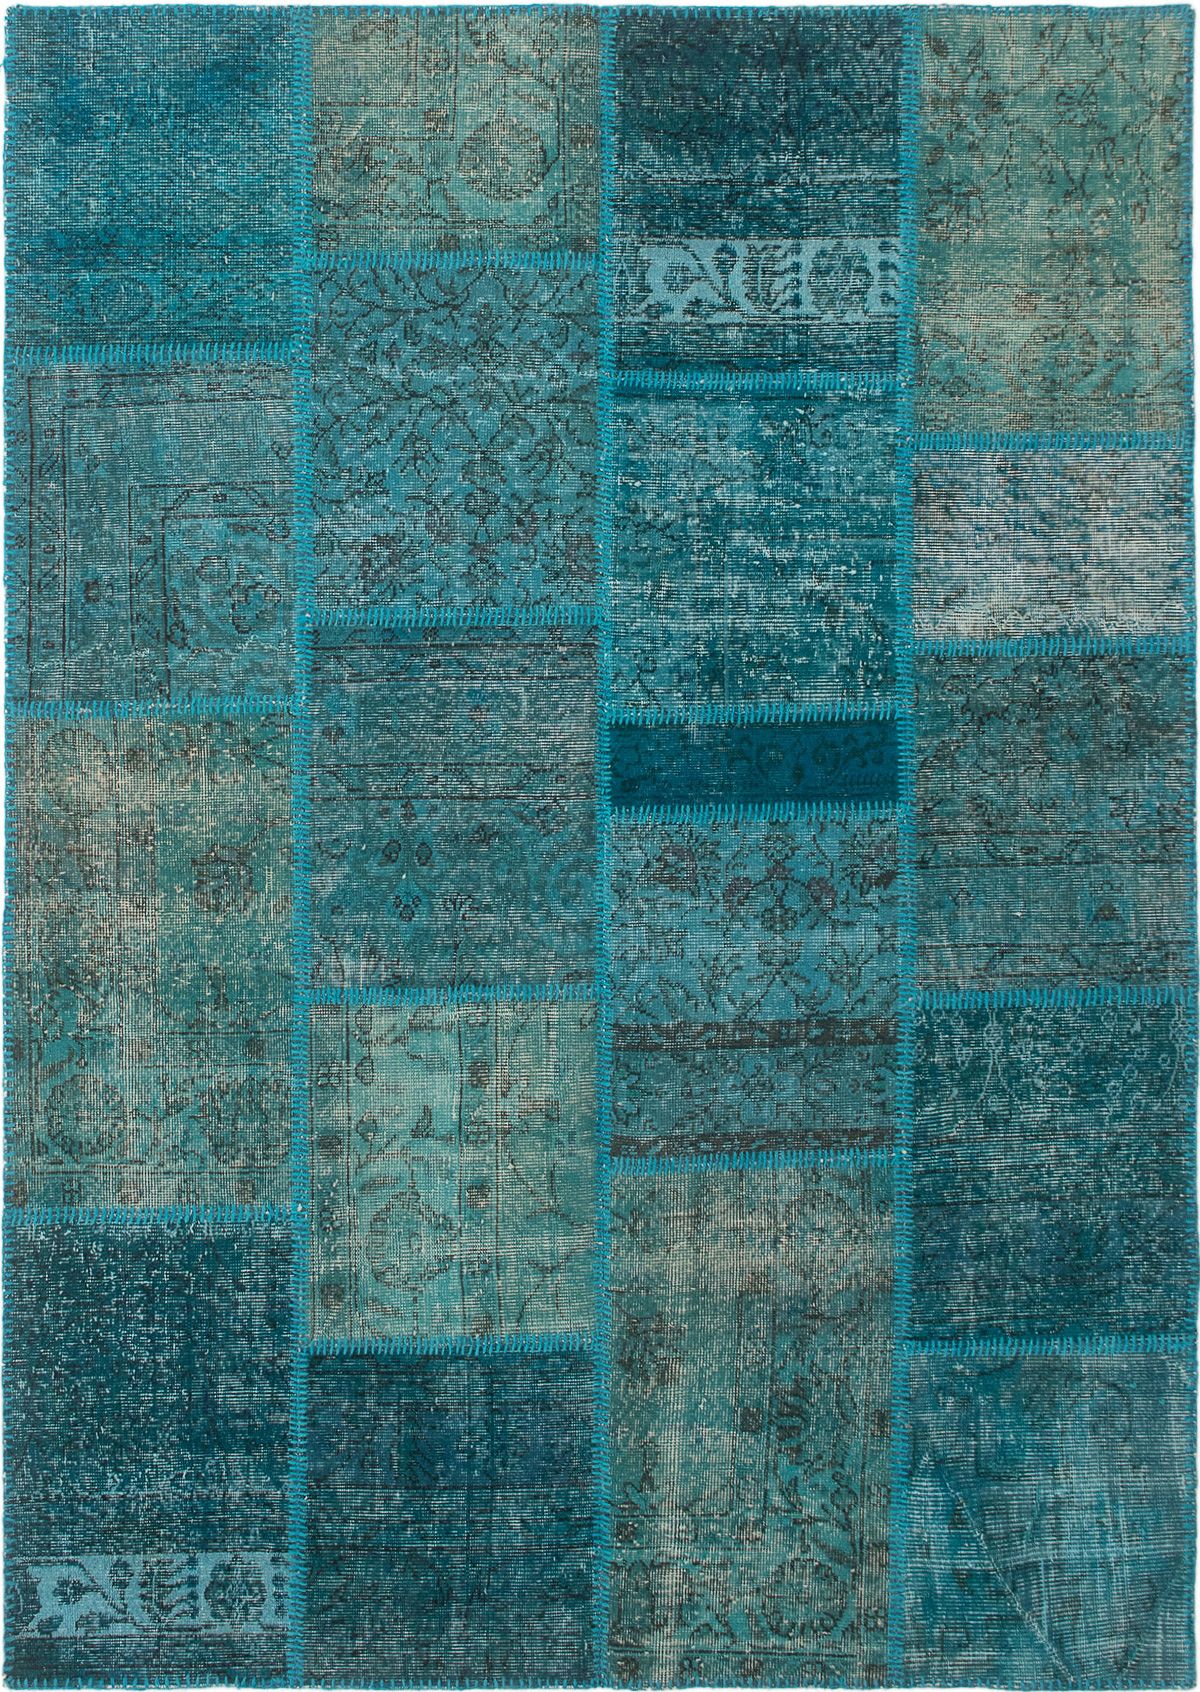 Hand-knotted Color Transition Patch Turquoise Wool Rug 5'7" x 7'10"  Size: 5'7" x 7'10"  